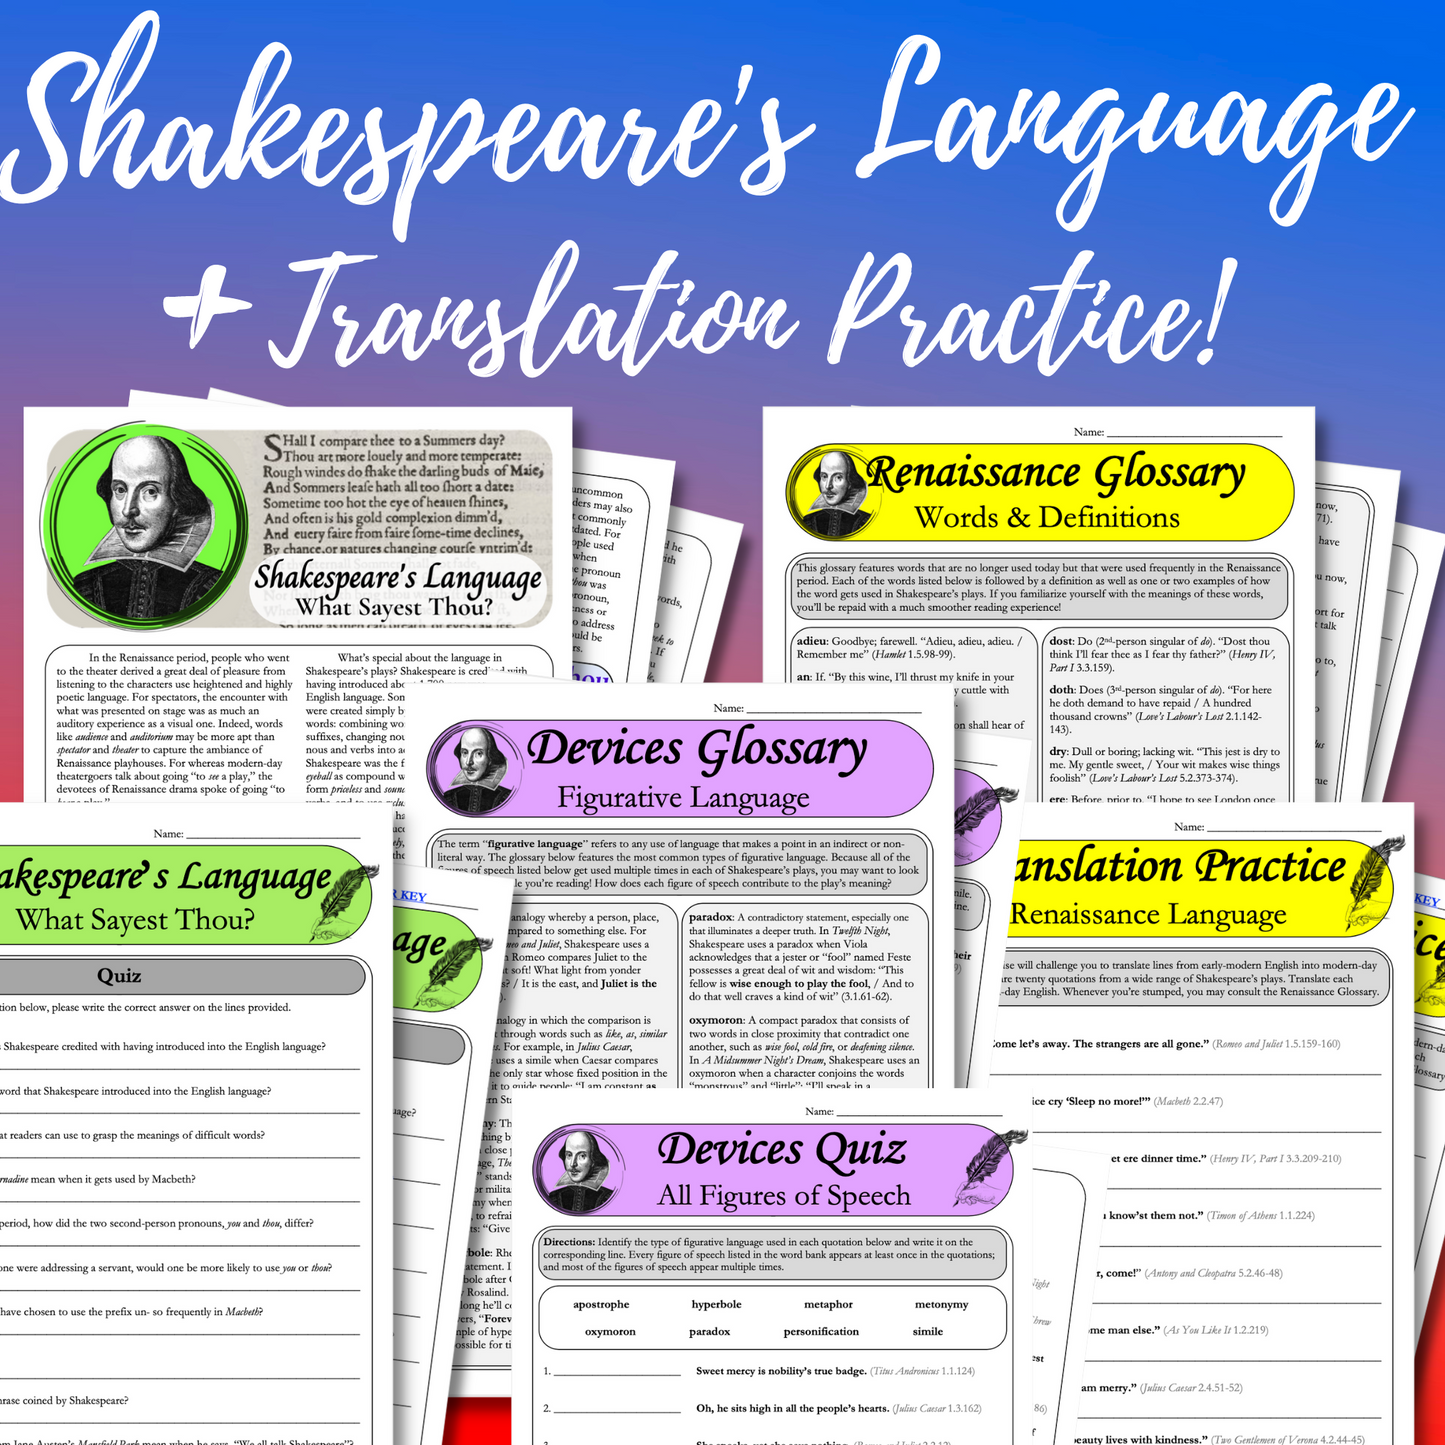 Introduction to Shakespeare: Author Biography, Globe Theater, Renaissance Language, Iambic Pentameter, & Shakespearean Insults